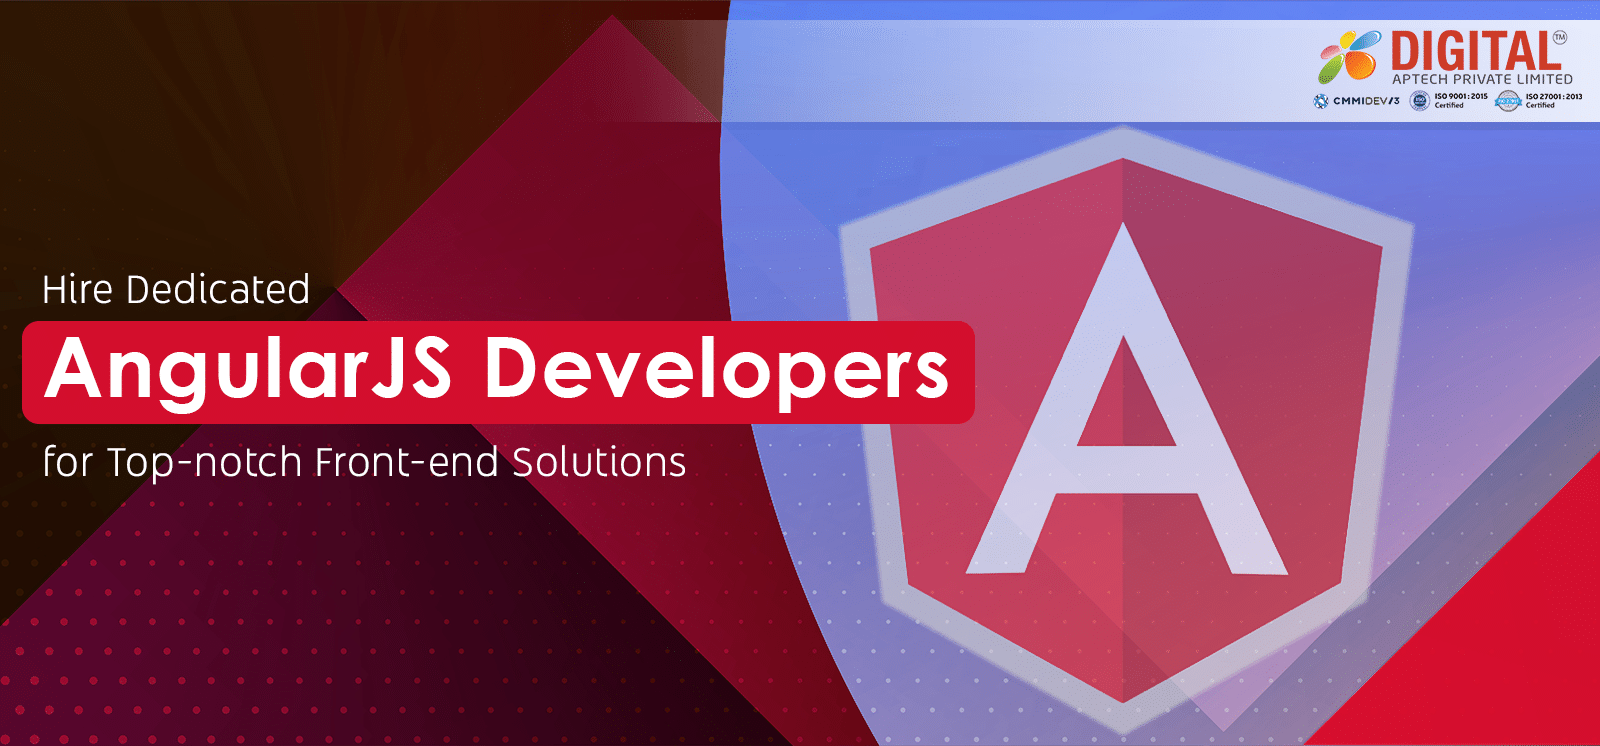 Hire Dedicated AngularJS Developers for Top-Notch Front-End Solutions